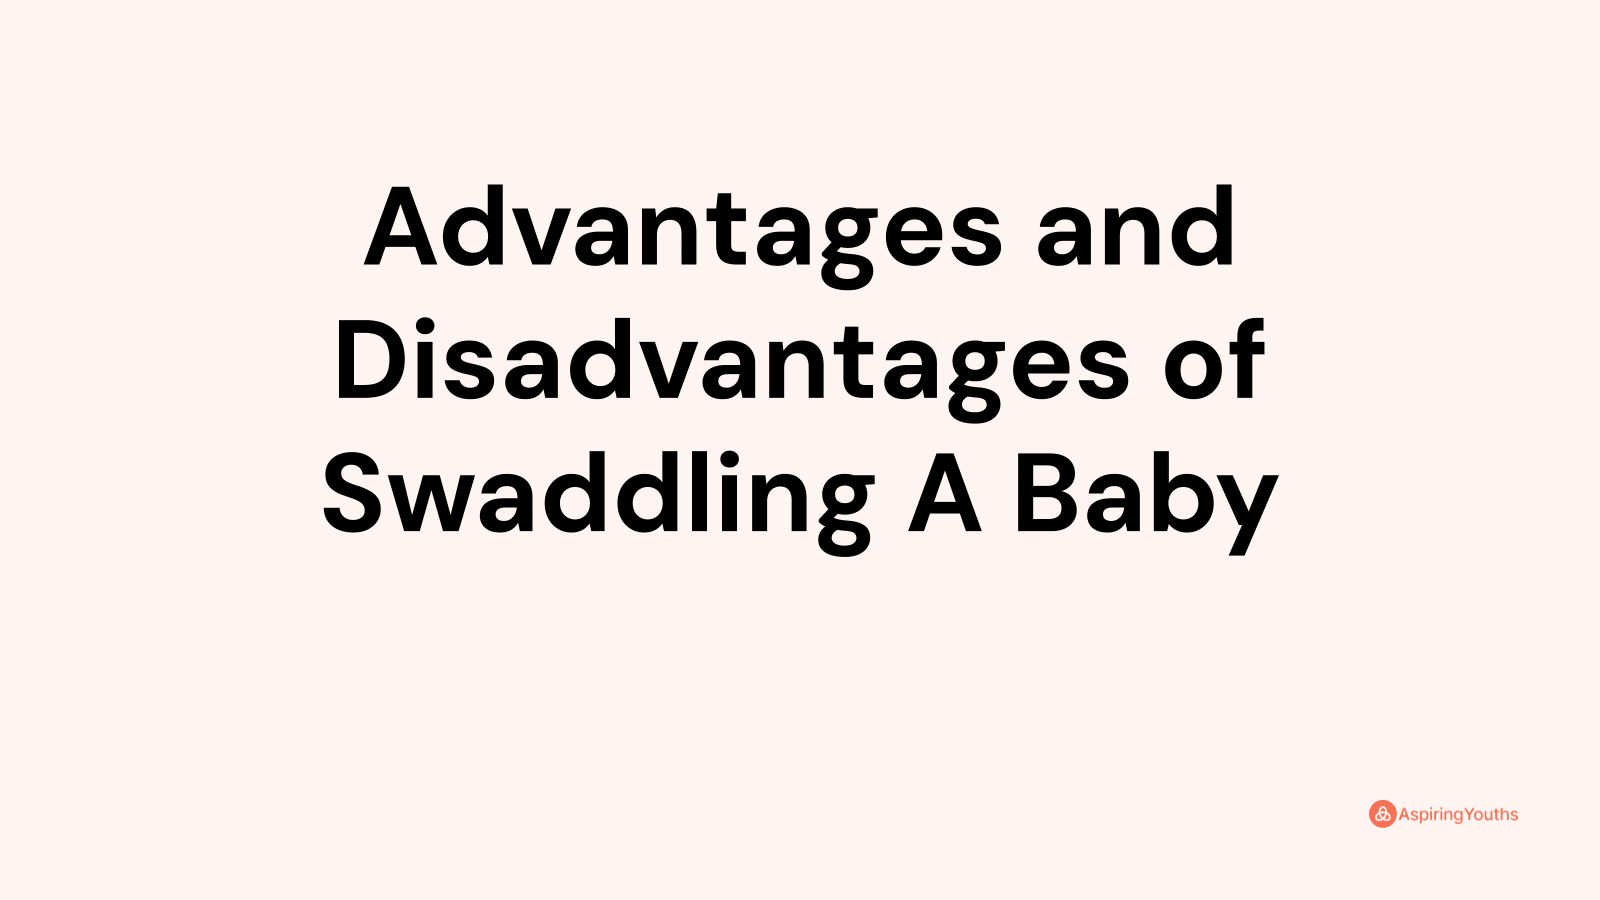 Advantages and disadvantages of Swaddling A Baby